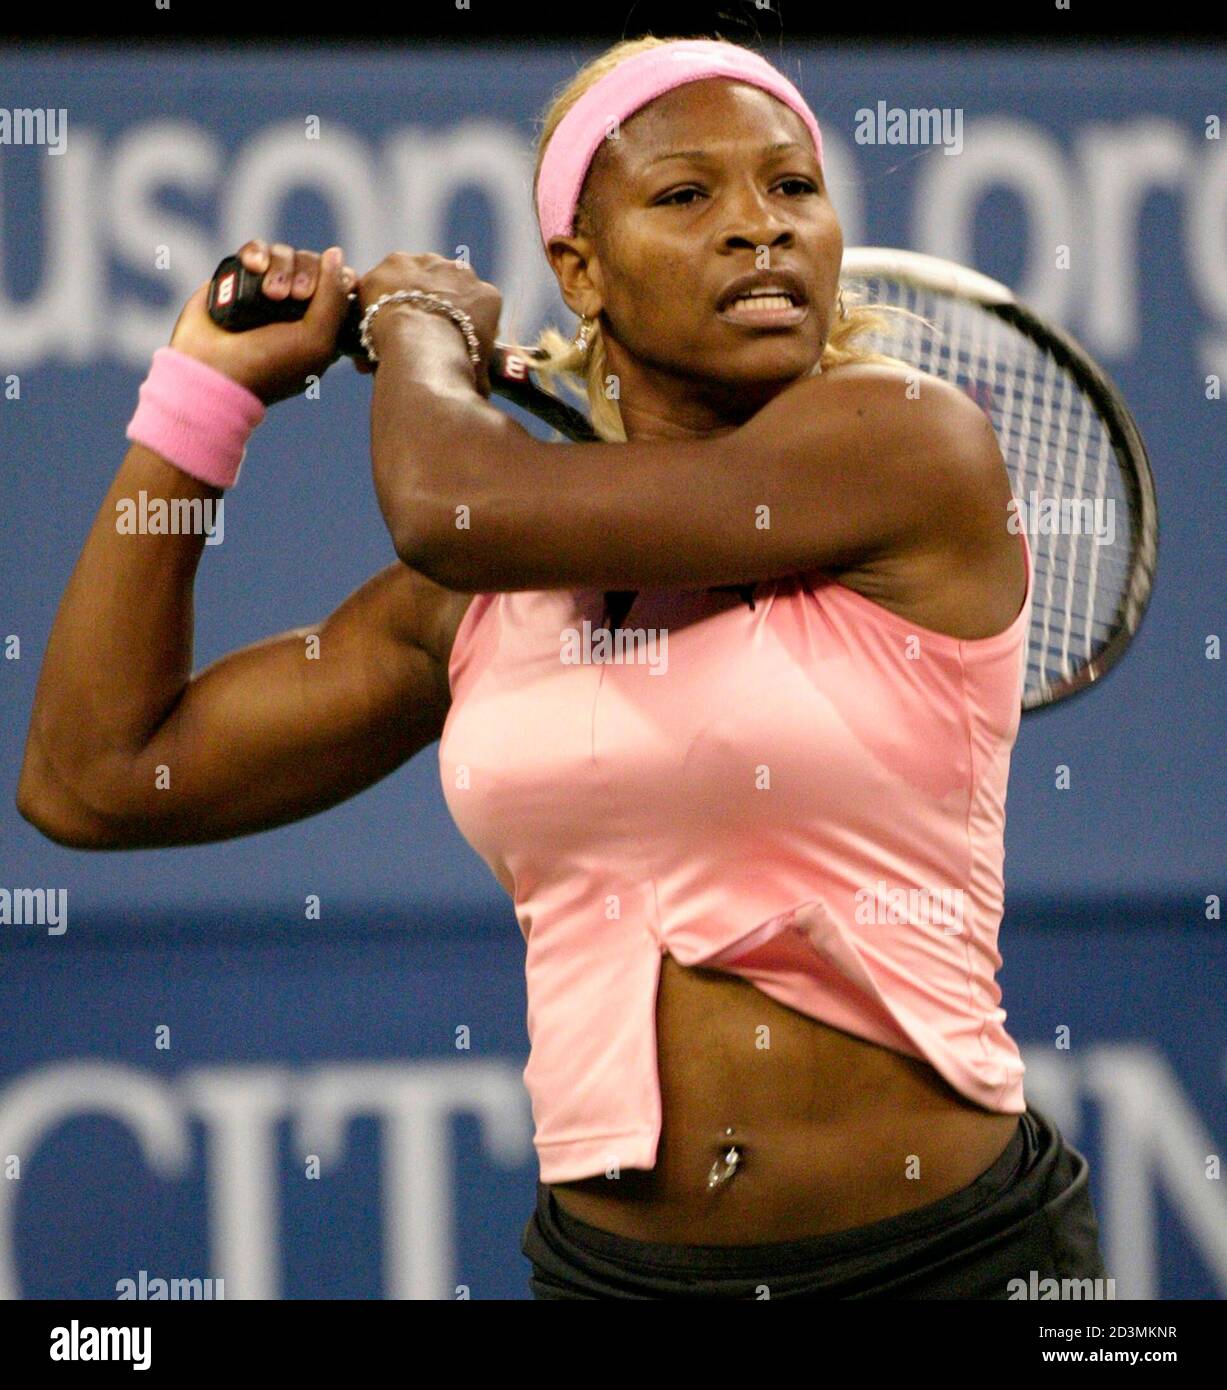 Serena Williams of the United States displays a belly button piercing  during her U.S. Open match